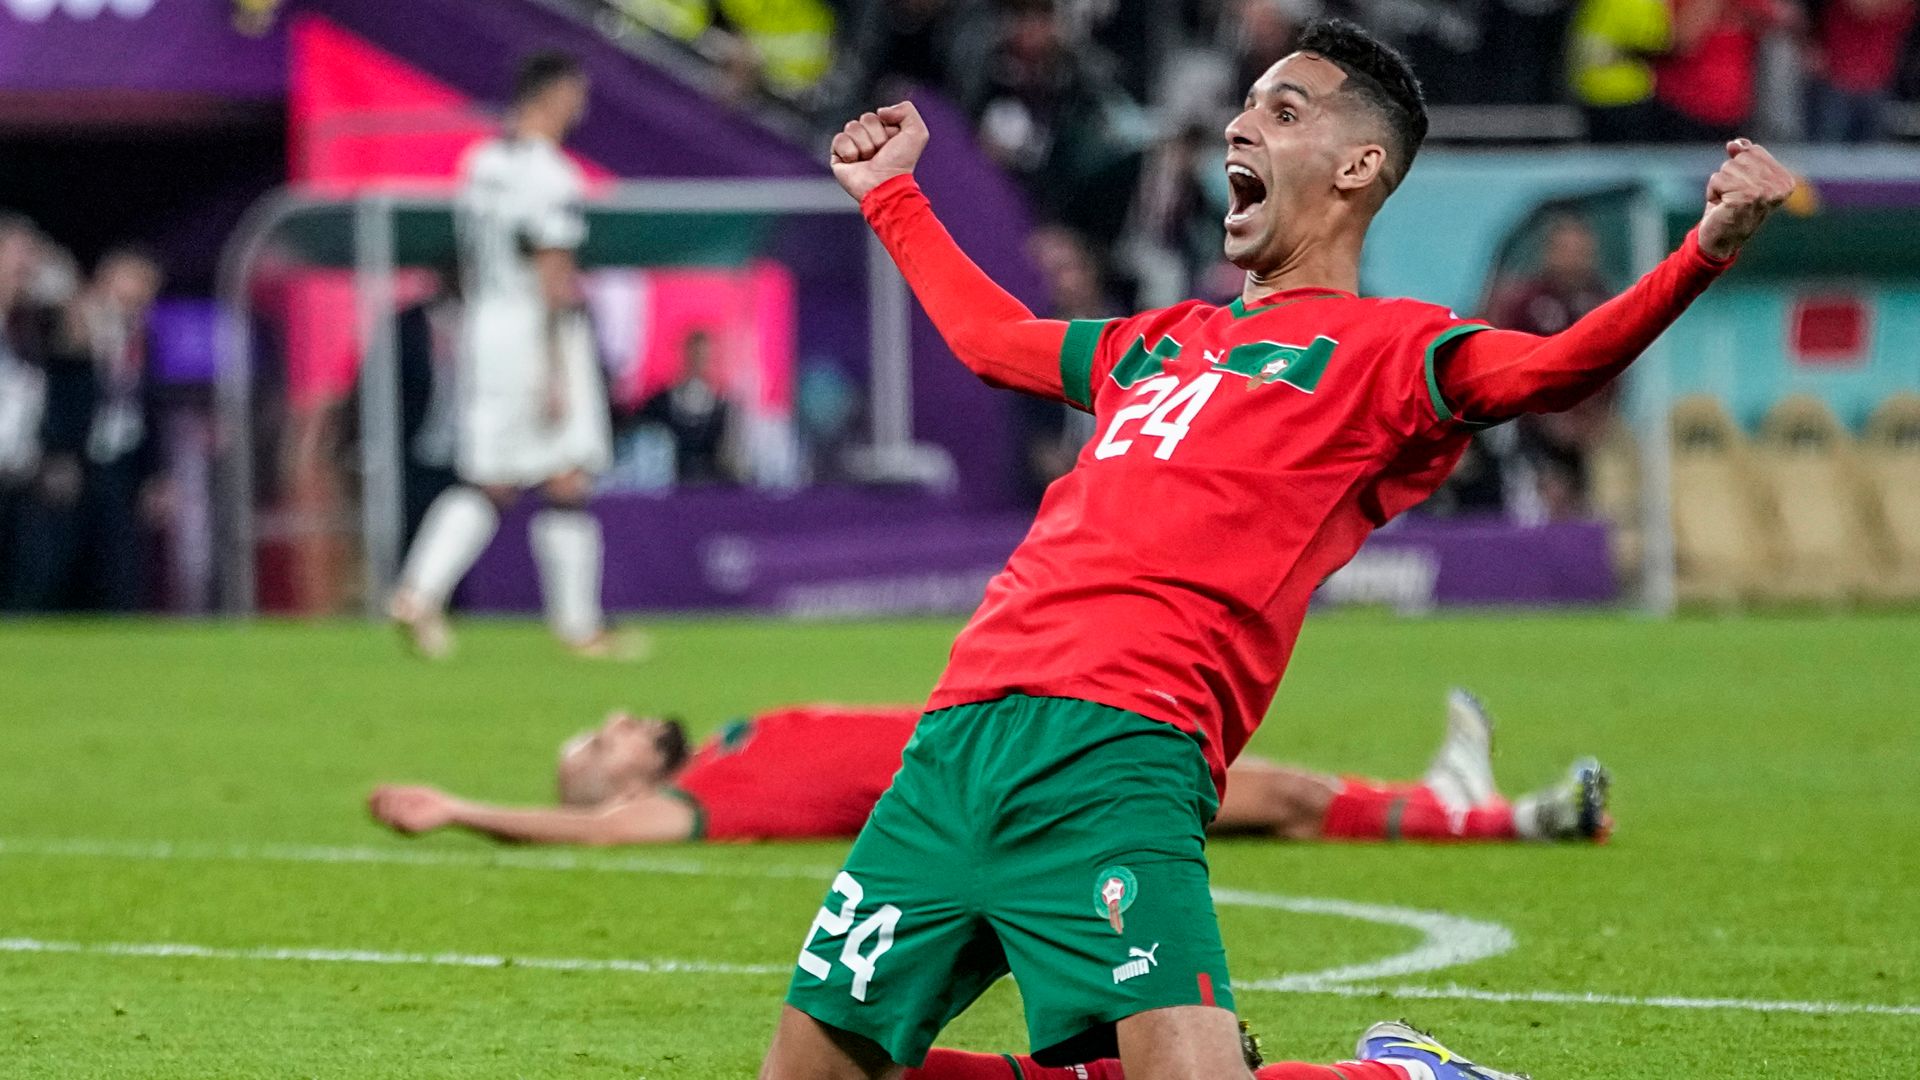 World Cup semi-finals: Can Morocco or Croatia shatter glass ceiling?